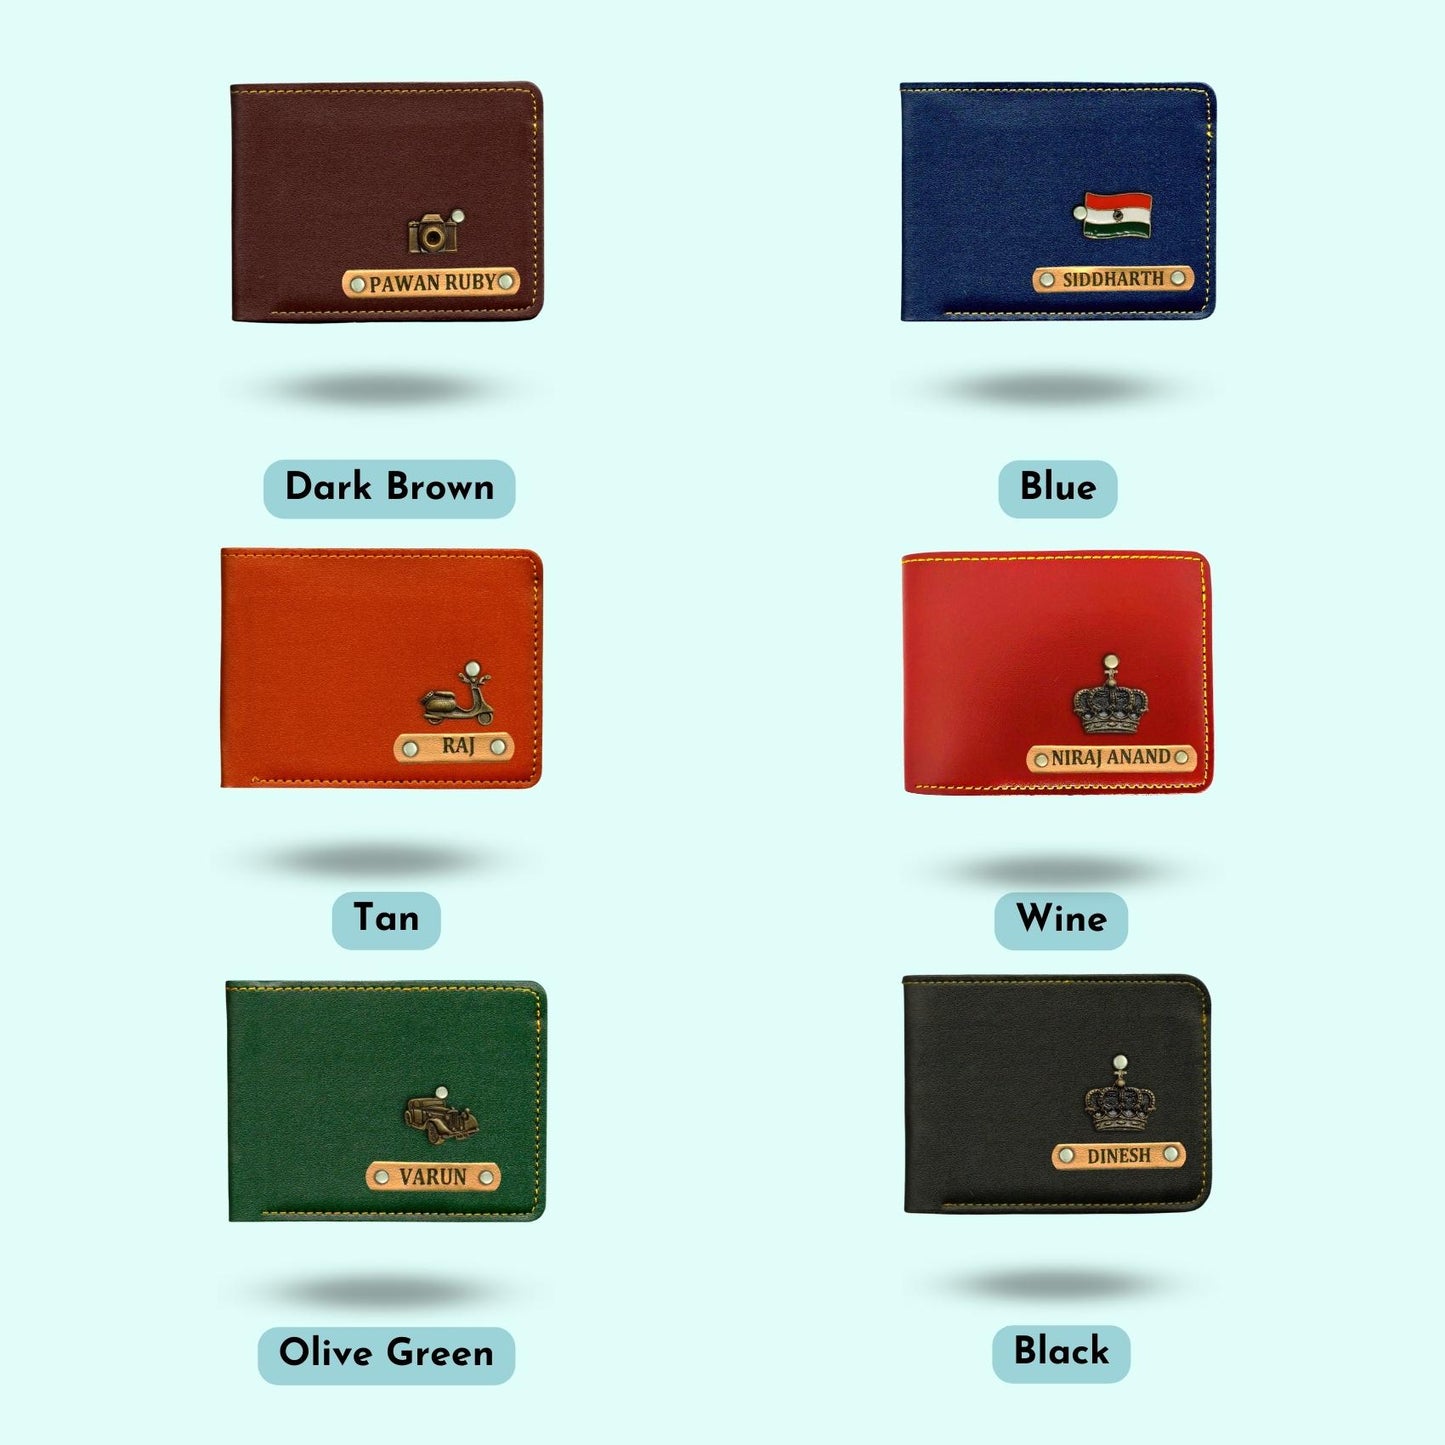 Personalized Wallets For Couples - Blue